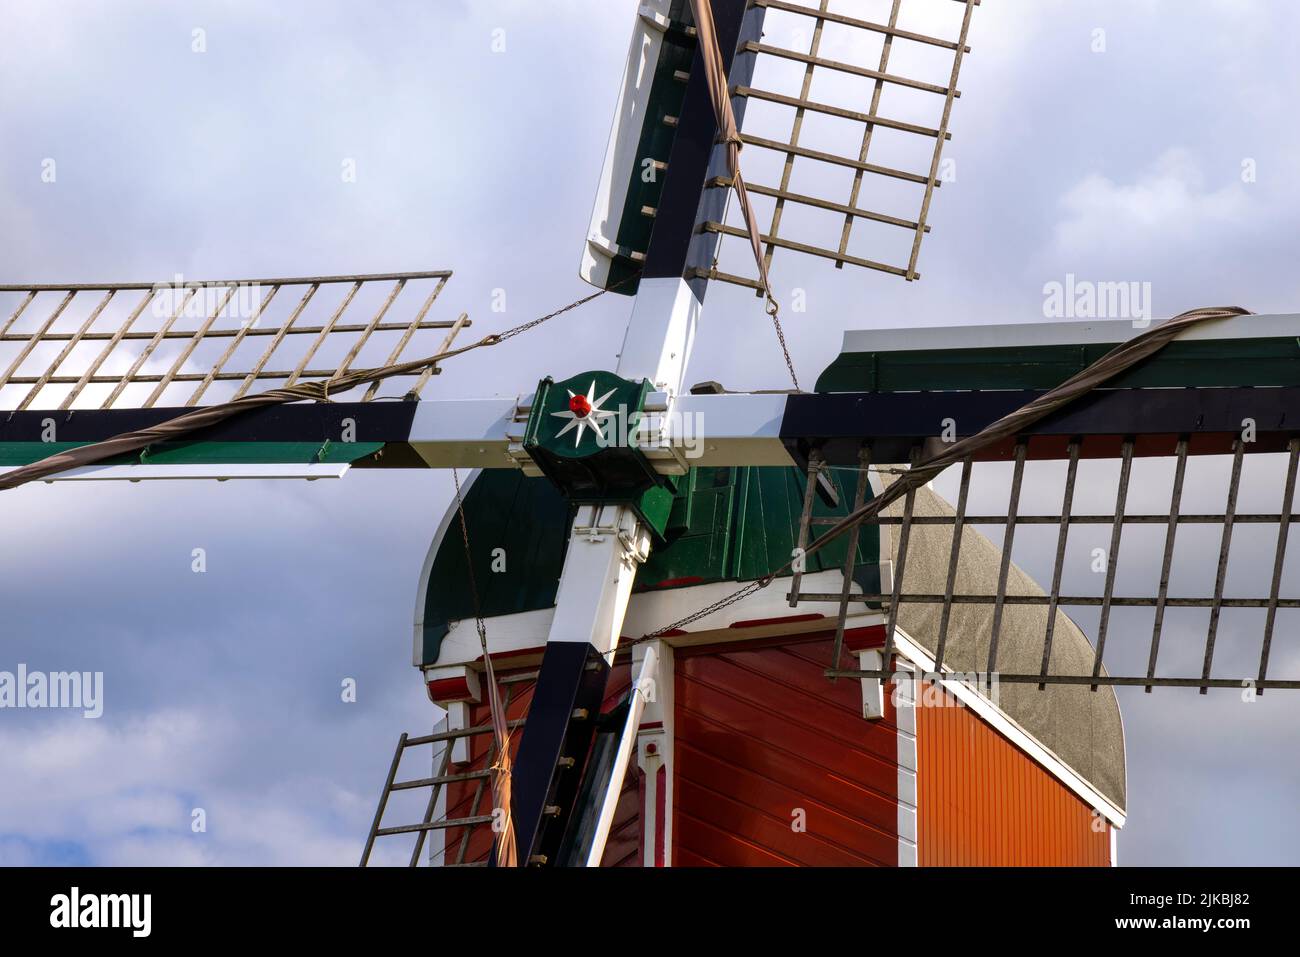 Detailed view of a historic drainage windmill, called Vrouw Vennemolen, Blauwe Polder, Oud-Ade, South Holland, The Netherlands. Stock Photo